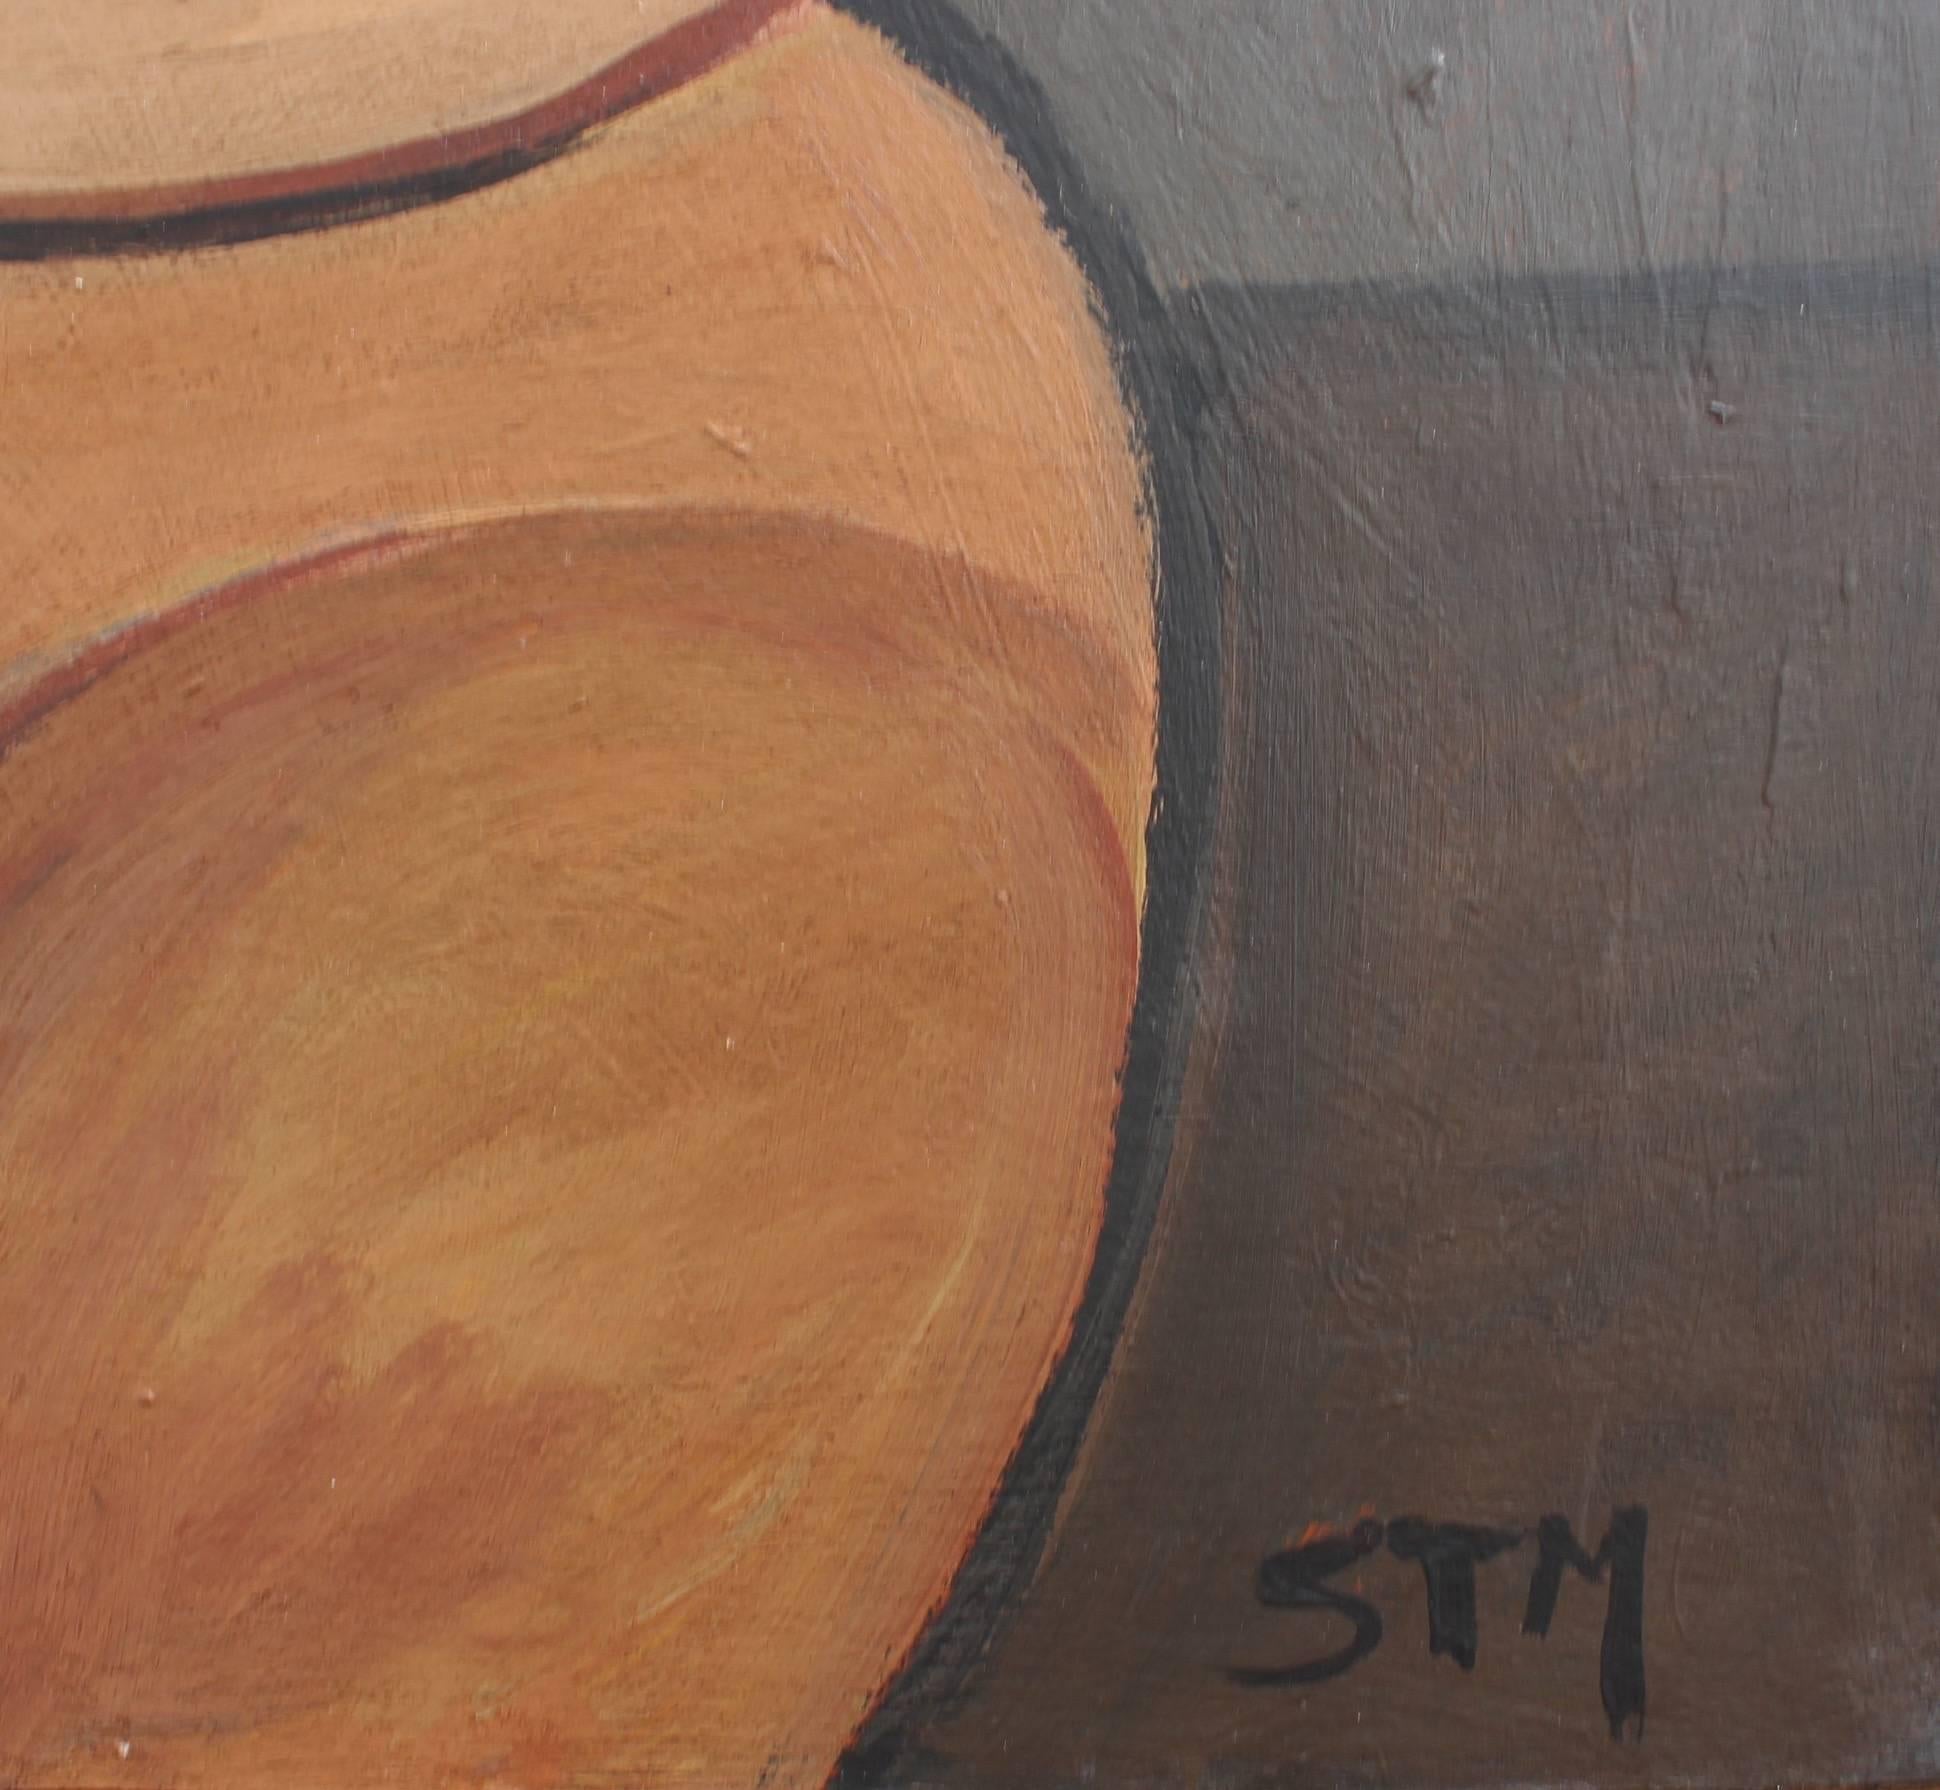 'Seated Cubist Nude', oil on board, by artist with the initials STM (circa 1950s). A splendid cubist depiction, this is a significant portrait of a seated nude woman in geometric perspective. The earth-tone hues - brown, beige, clay-red with a